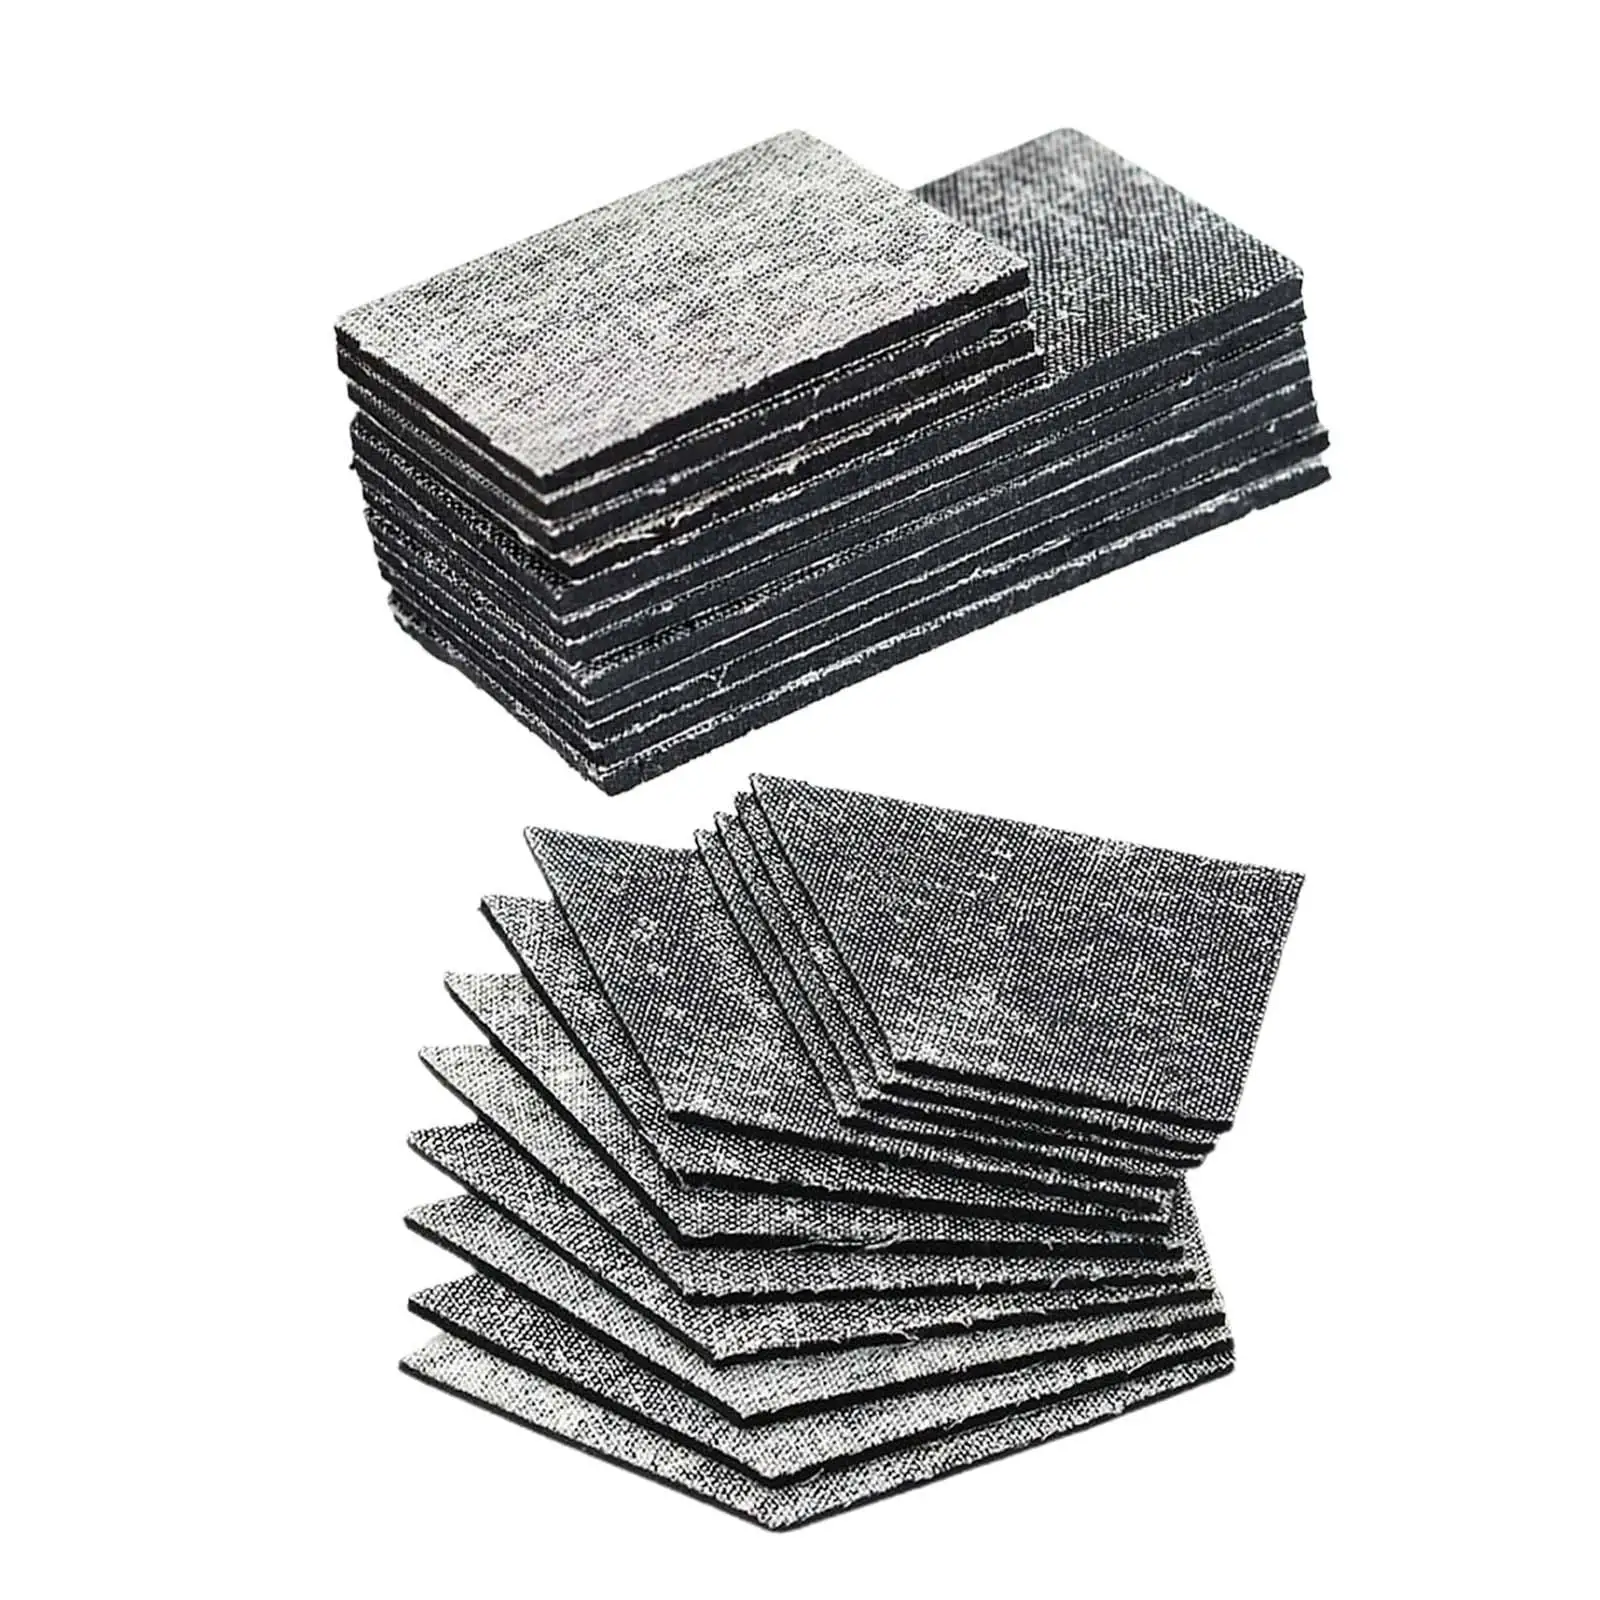 12Pcs Pool Table Cushion Facings Replacement Entertainment 4.5mm Thick Rubber Pad for Billiard Room Indoor Game Practice